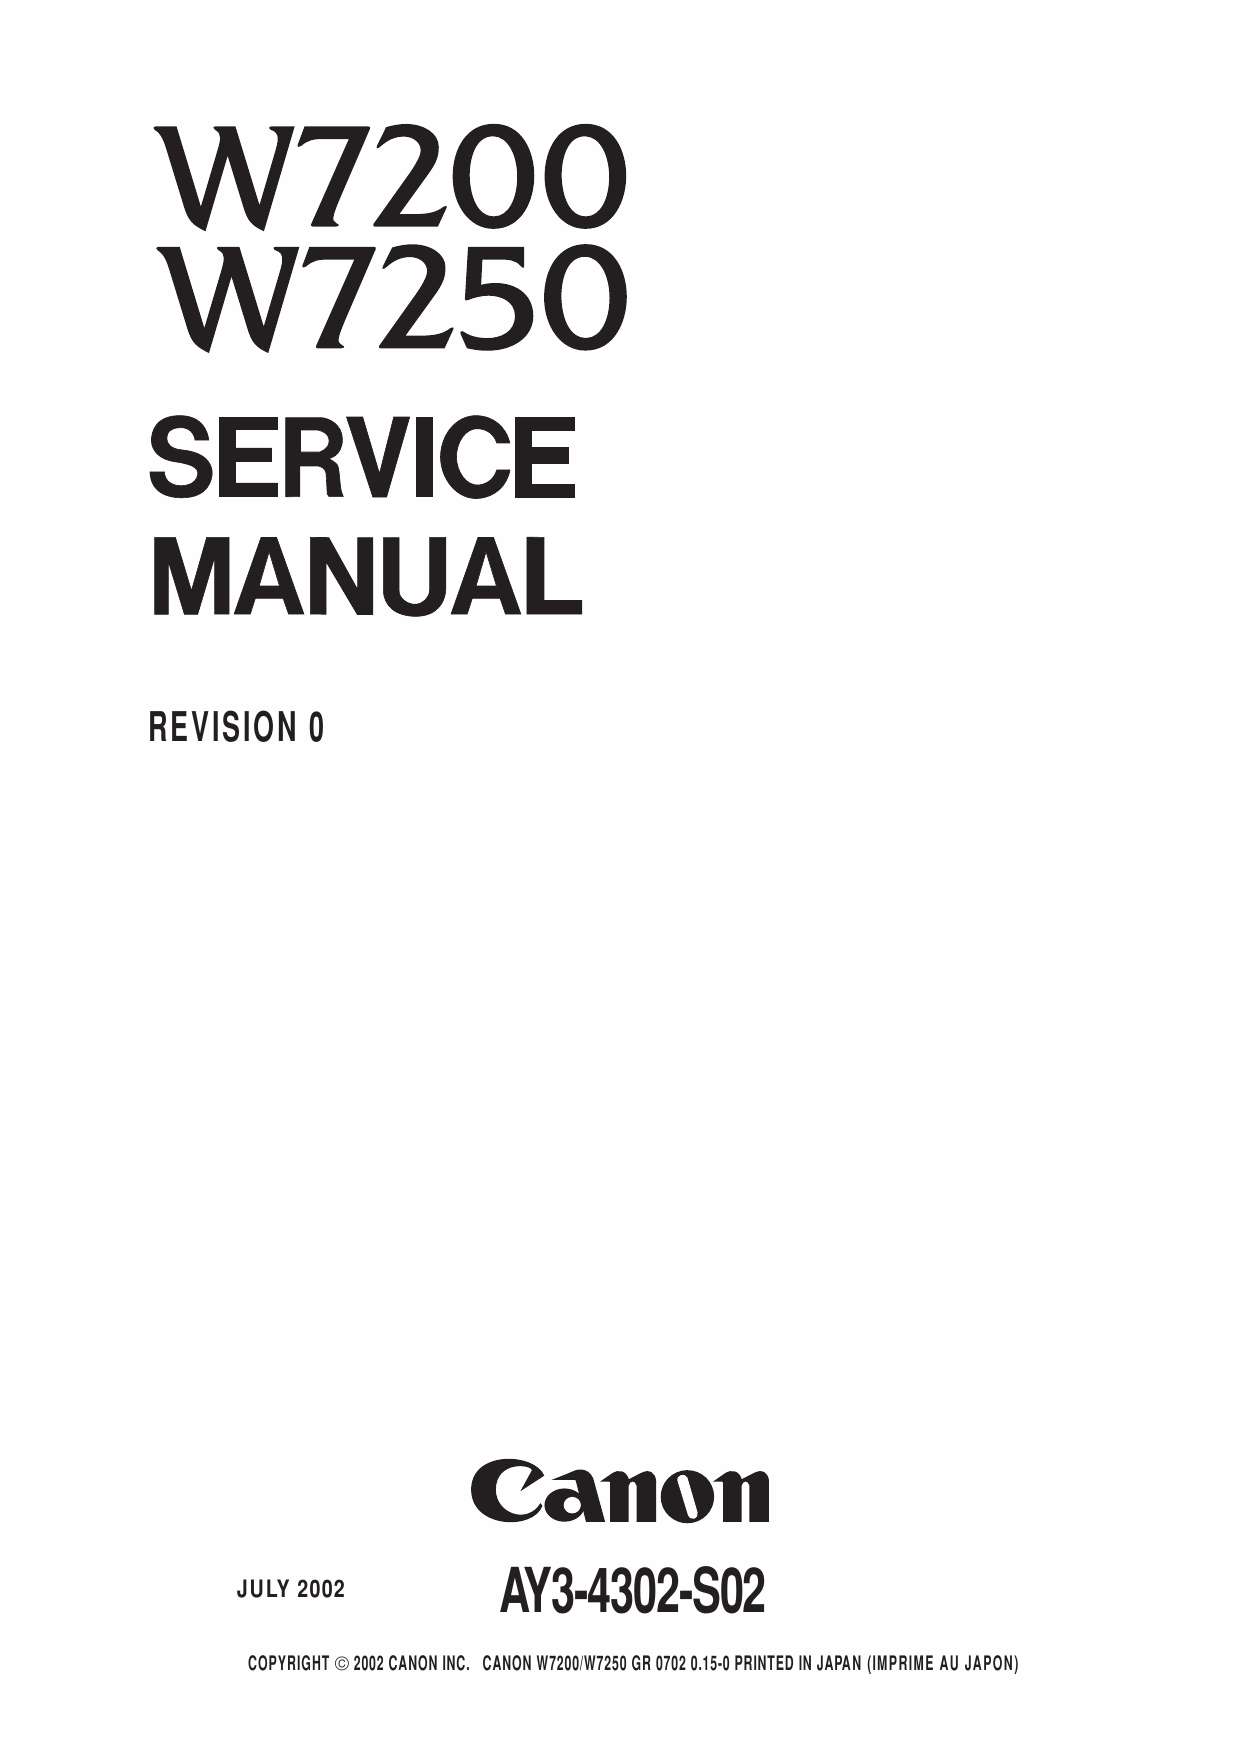 Canon Wide-Format-InkJet W7200 W7250 Service and Parts Manual-1